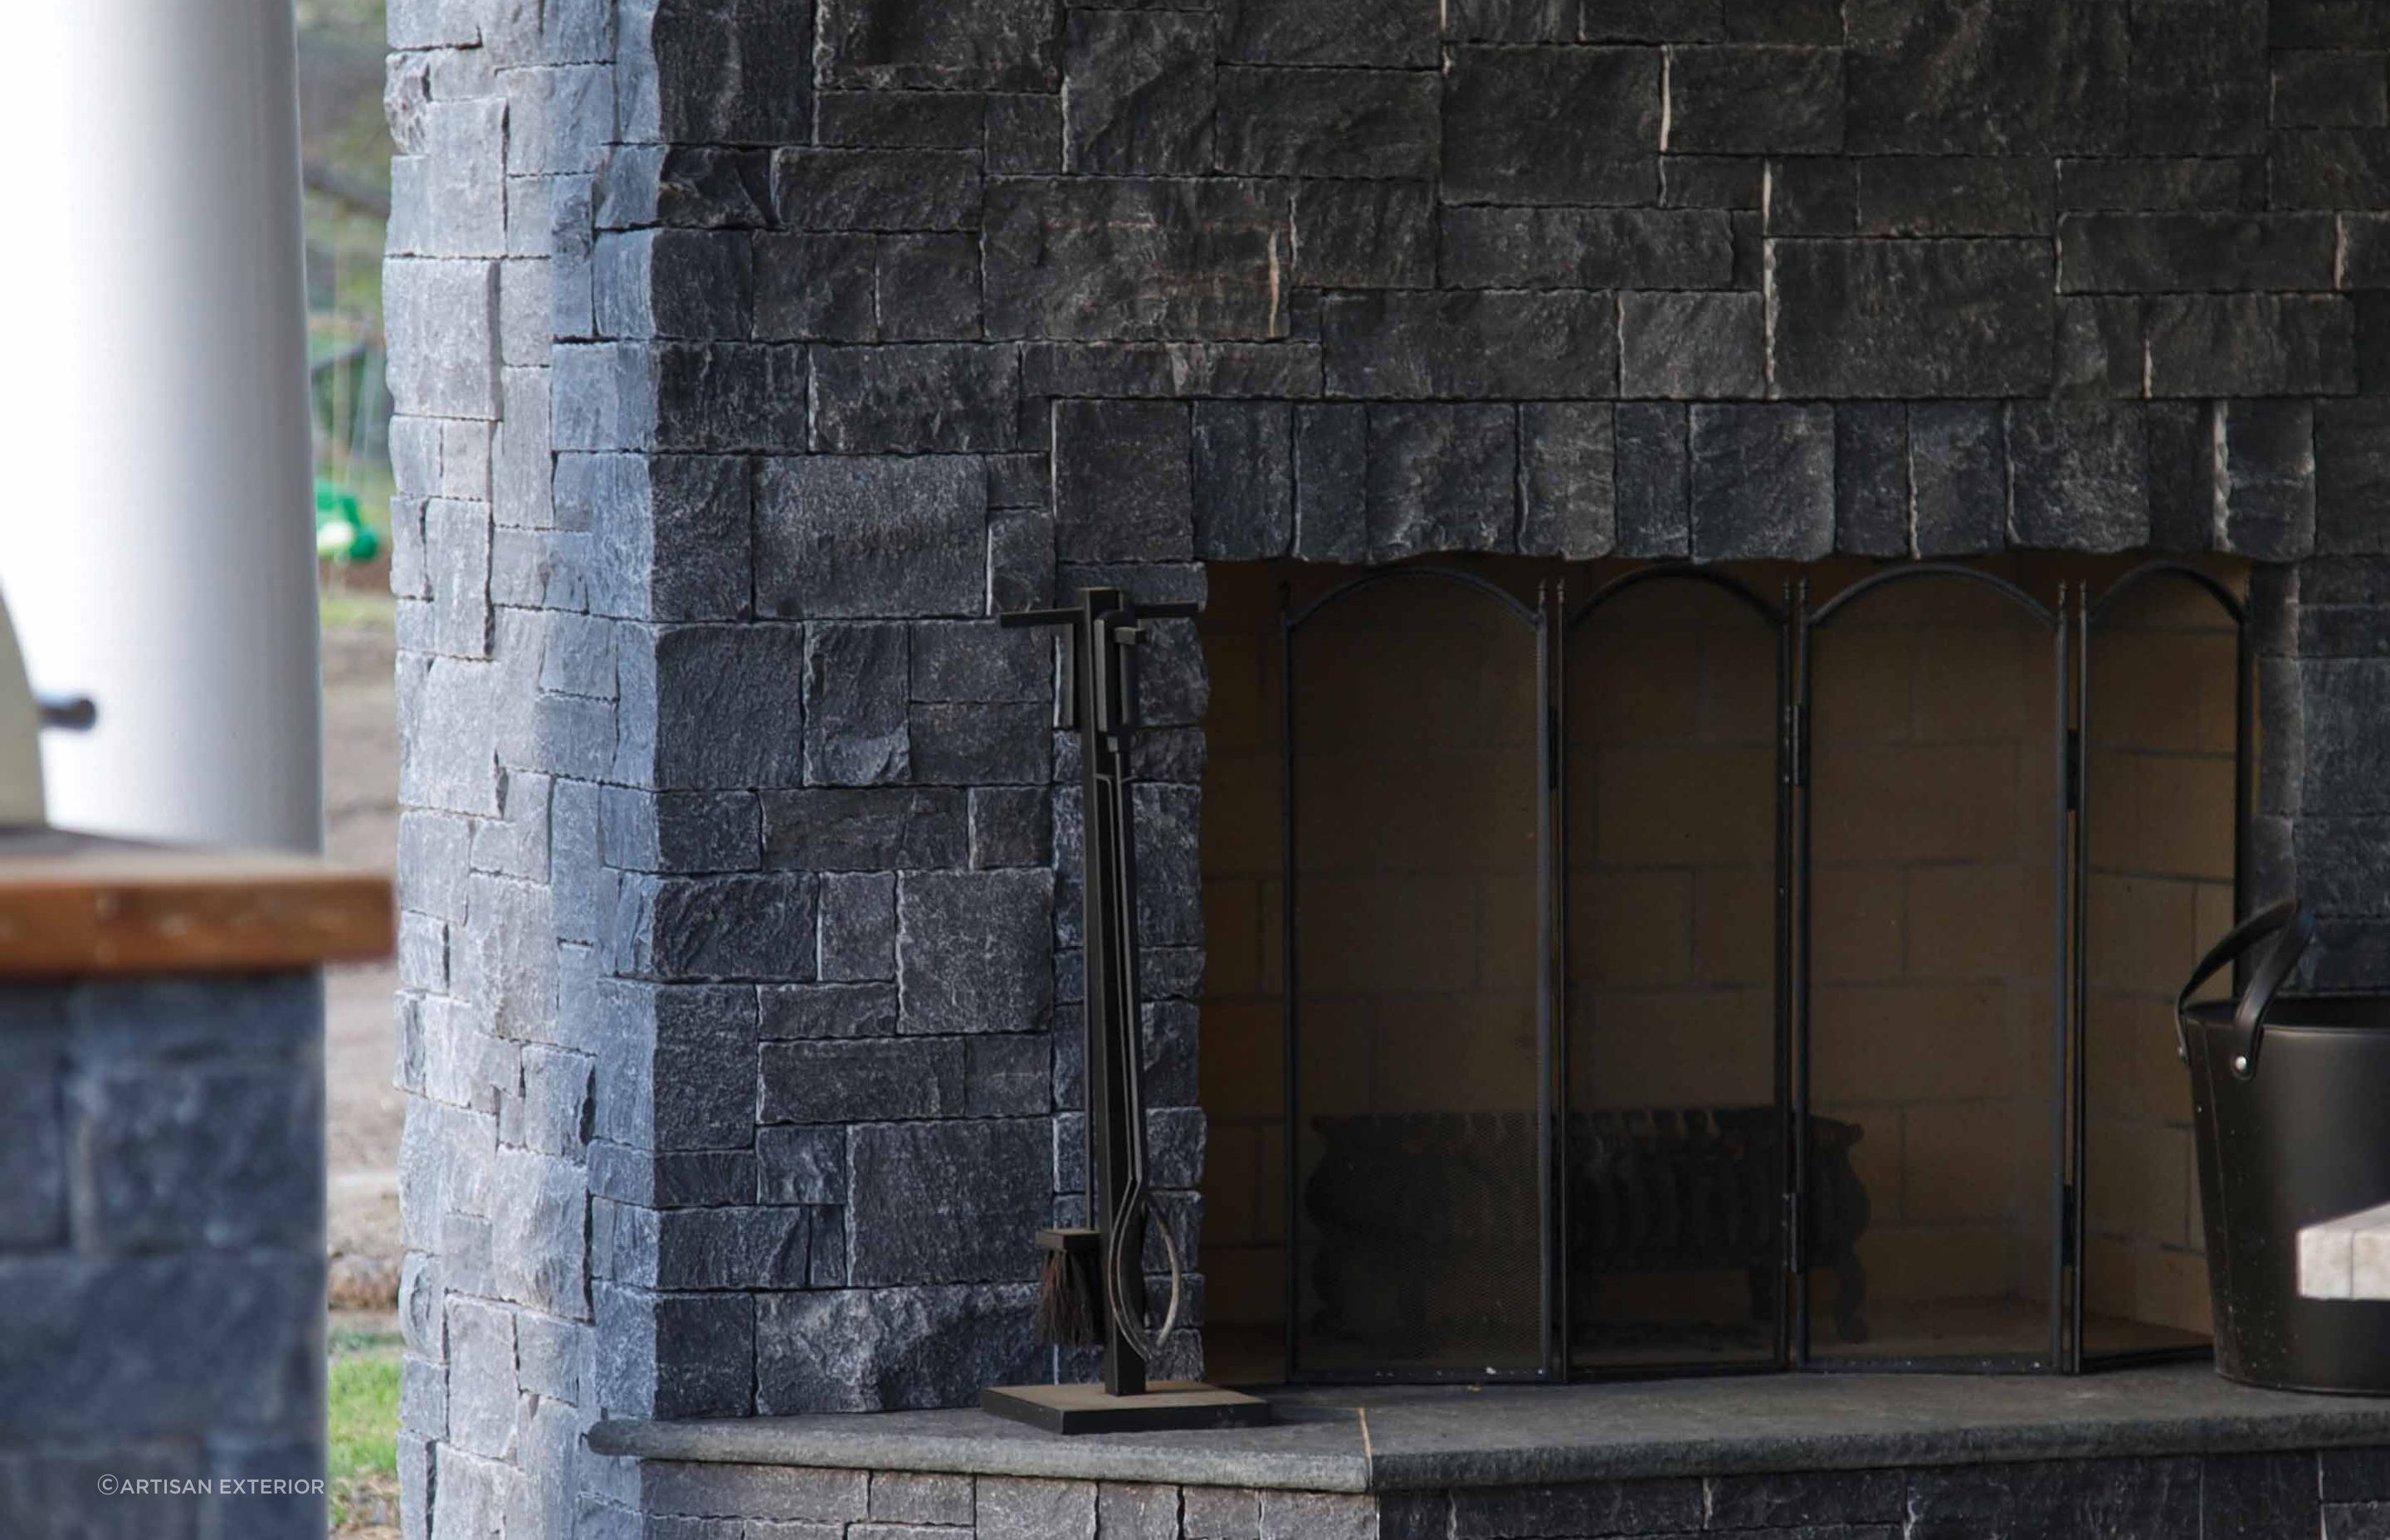 Noir modular stone wall cladding with its earthen charcoal appearance is a stunning cladding choice for a fireplace and the surrounding wall.